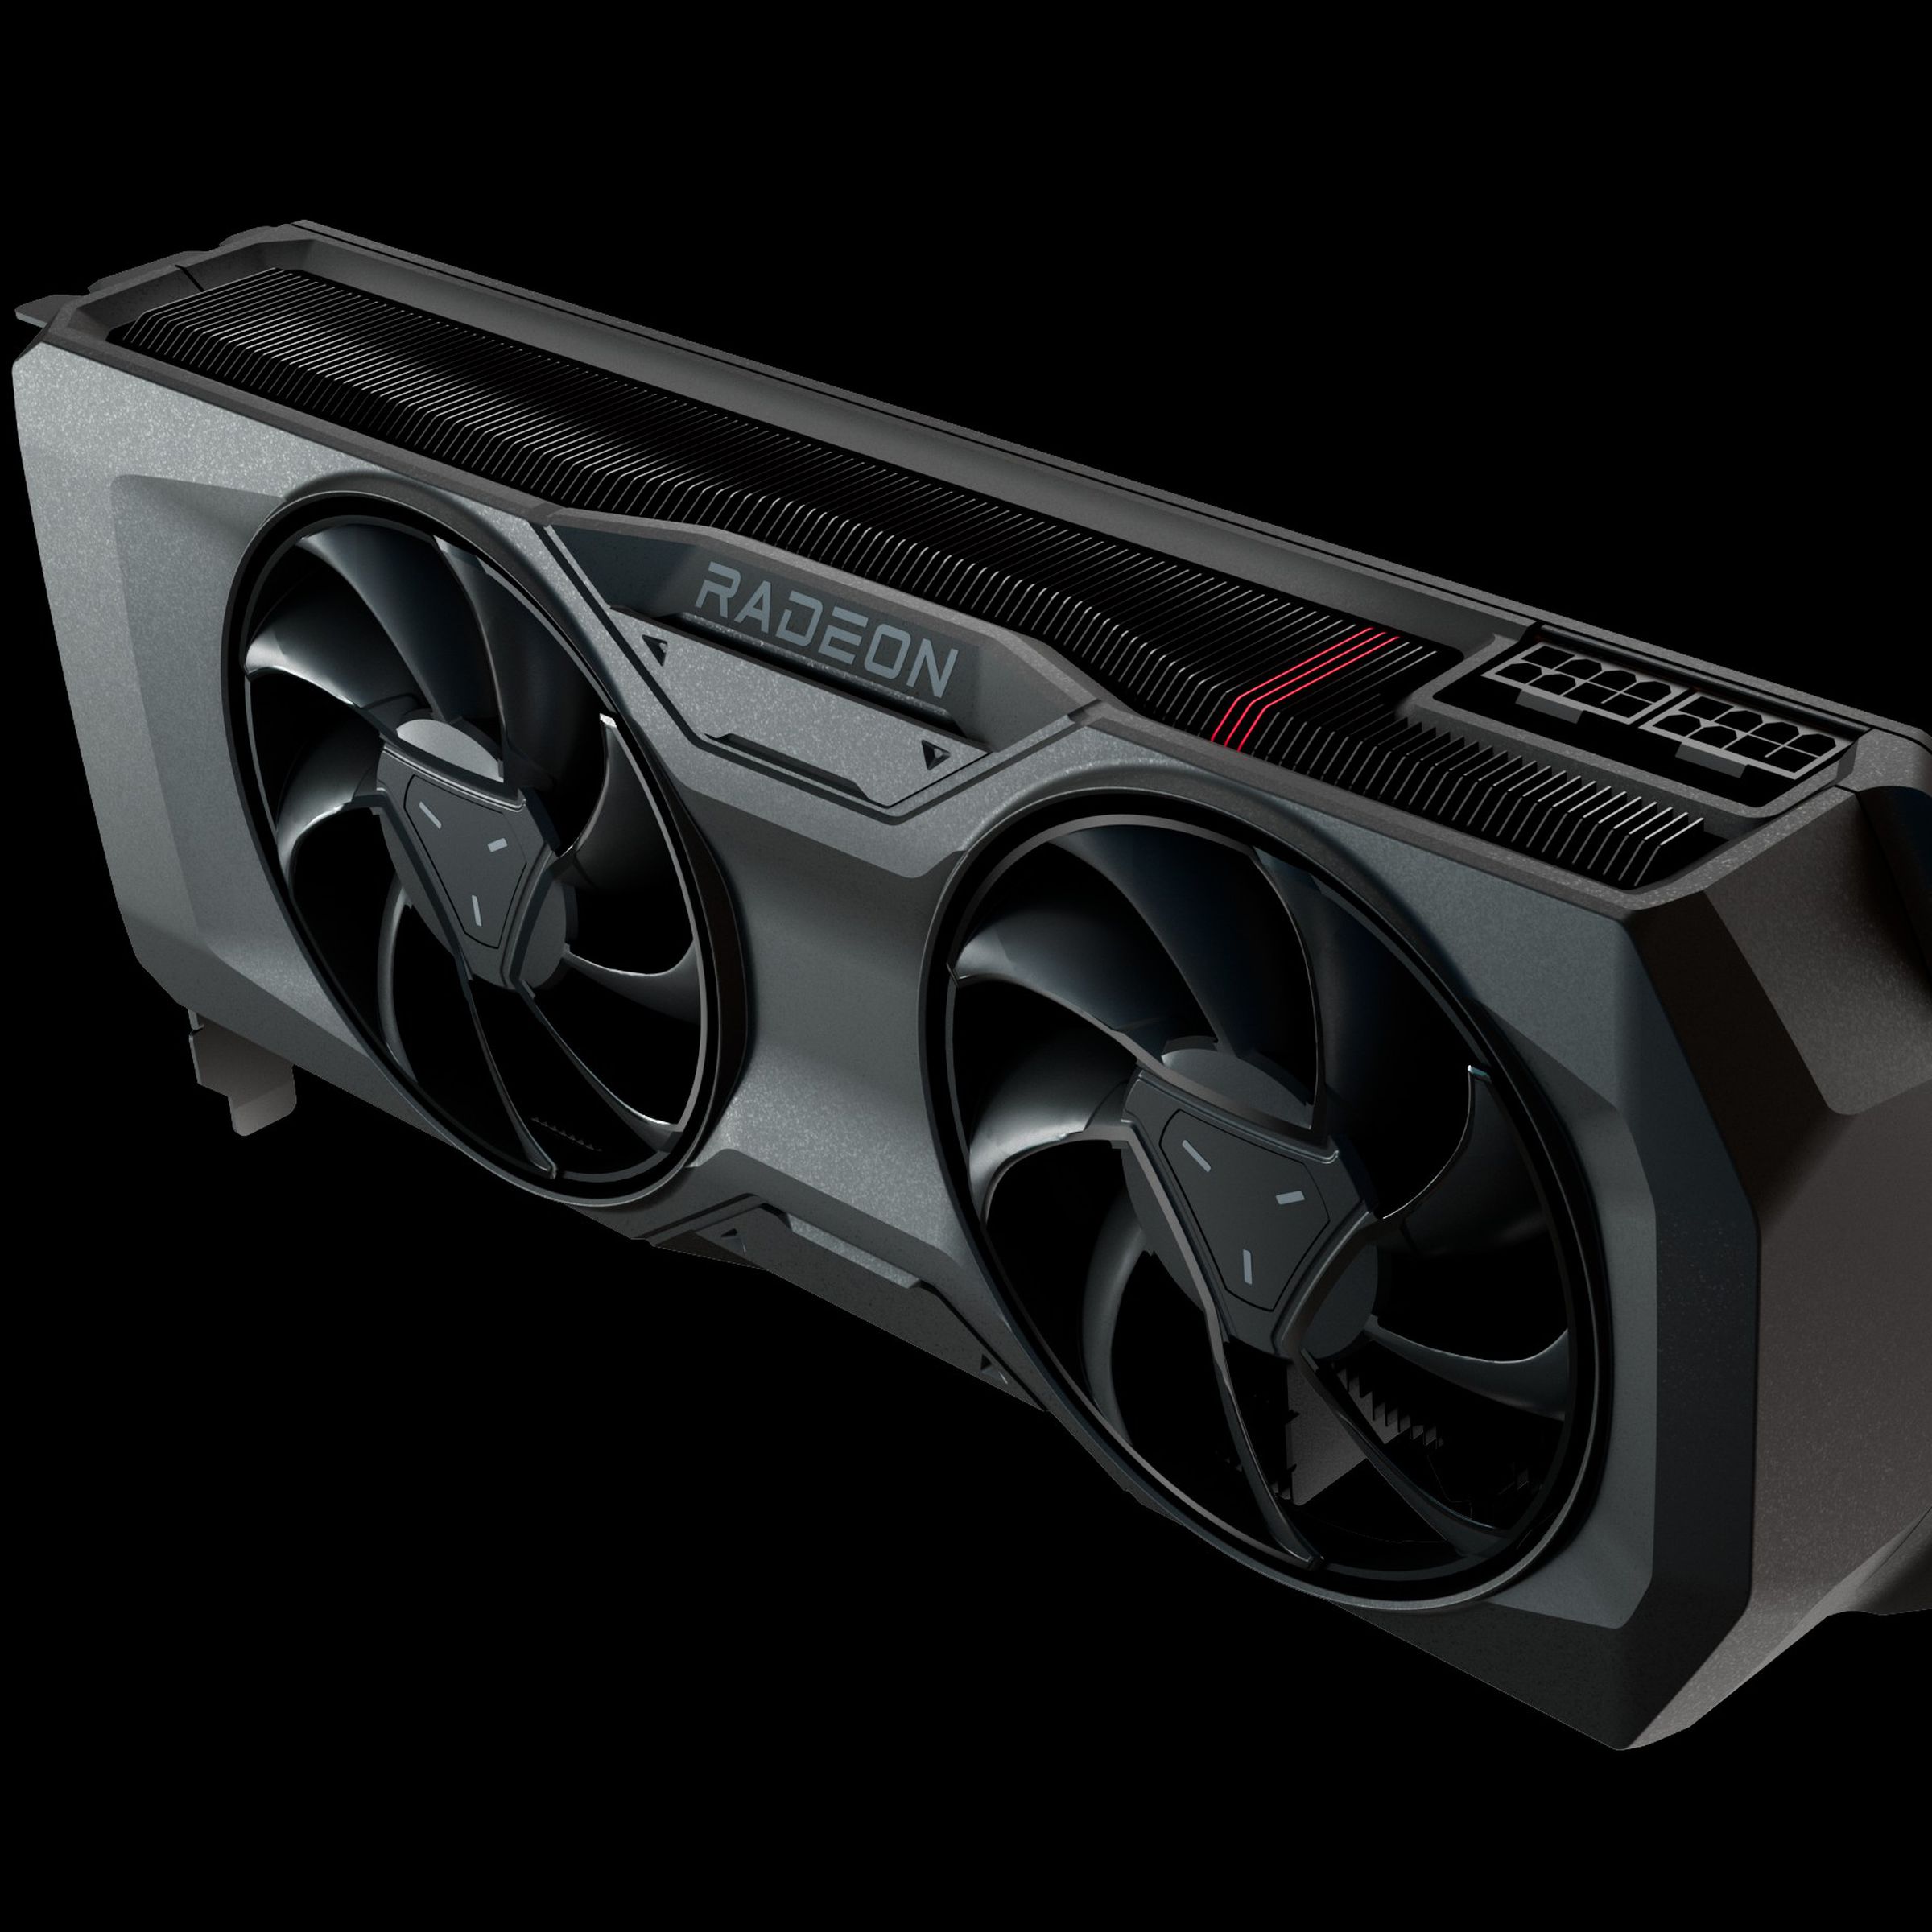 The AMD Radeon RX 7800 XT reference design. The lesser 7700 XT won’t be available with this AMD cooler.